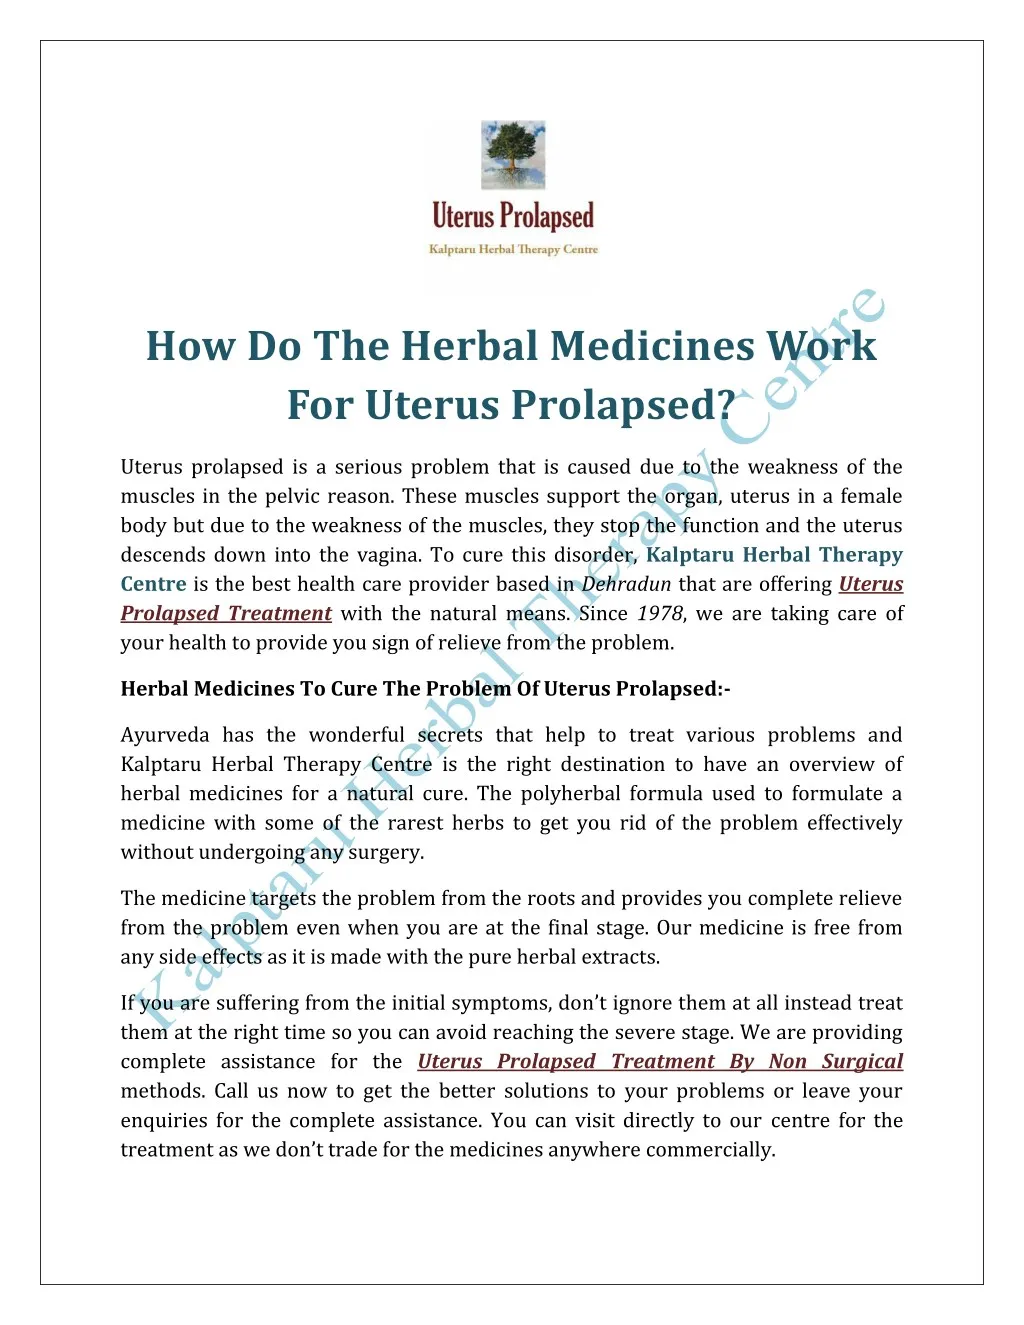 how do the herbal medicines work for uterus